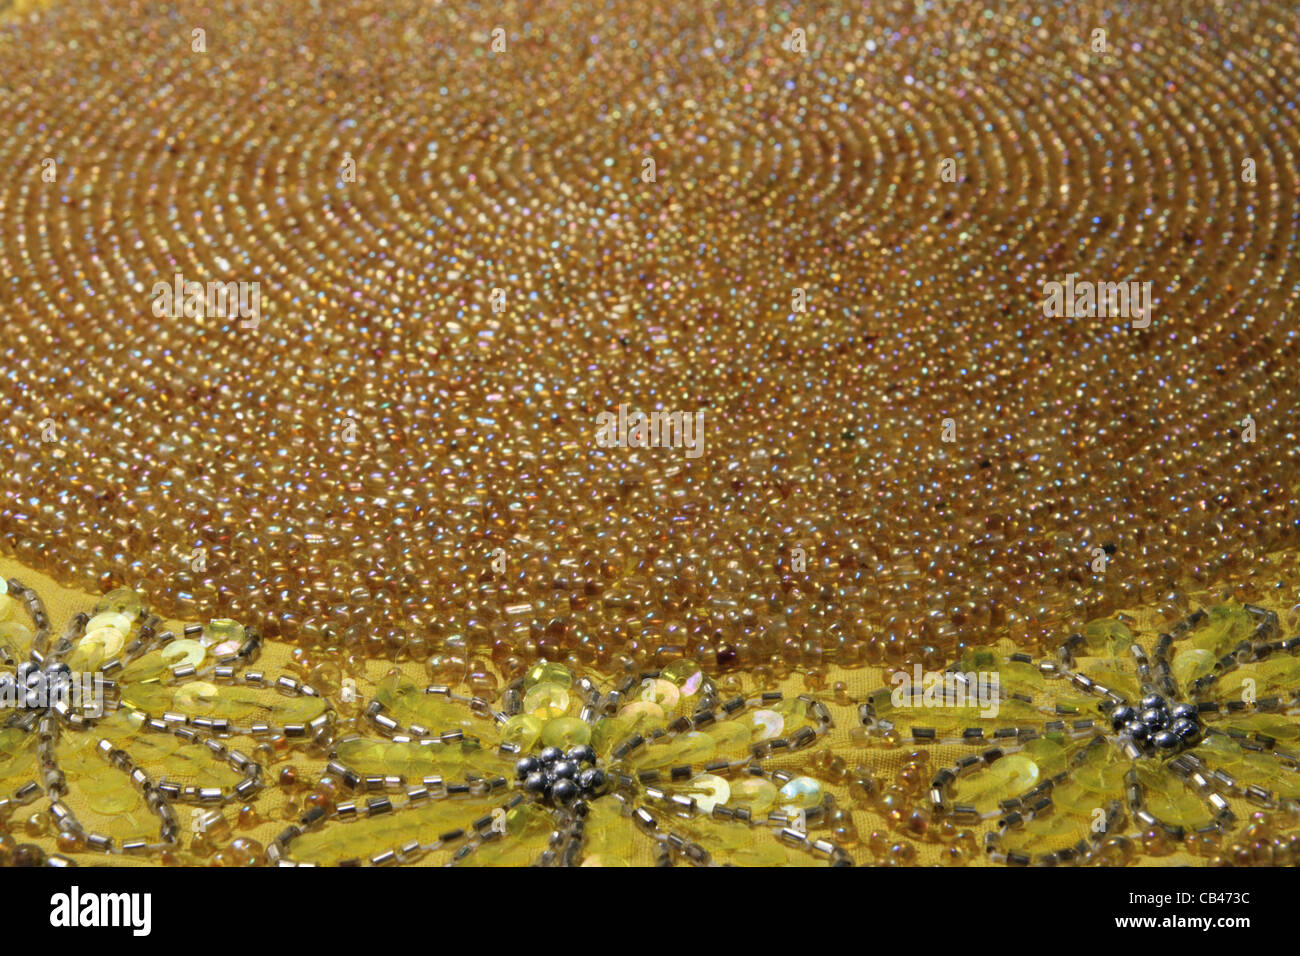 antique yellow beaded mat from an angle with a shallow depth of field Stock Photo